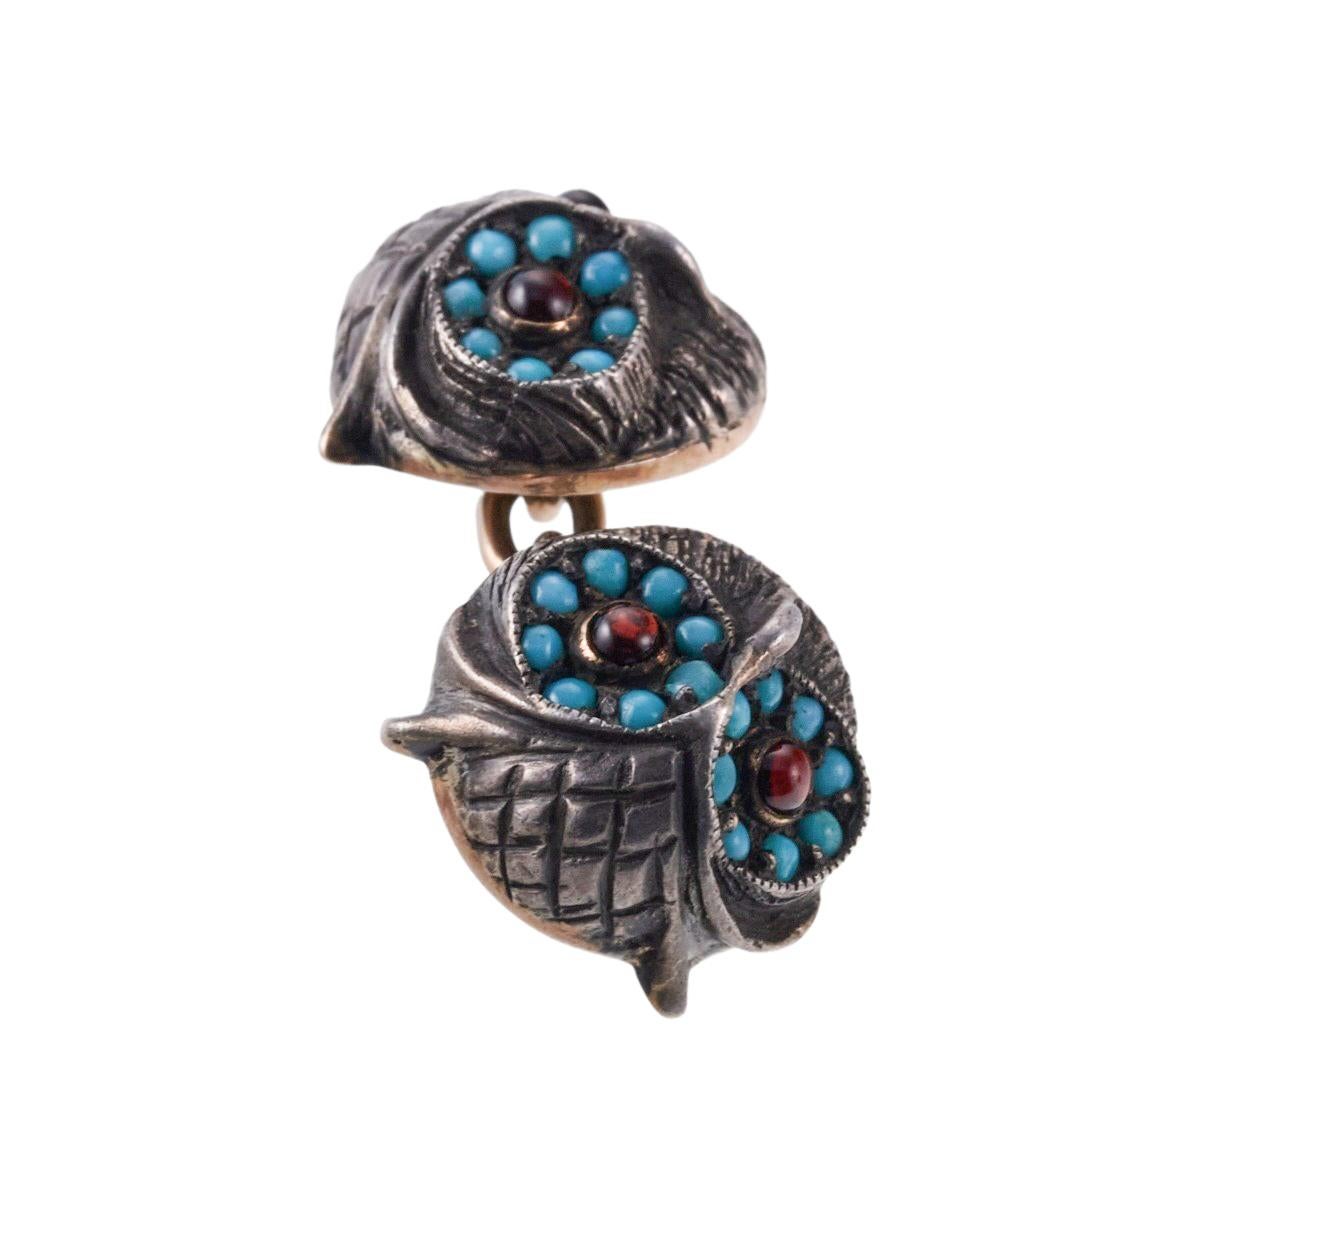 Pair of antique silver top and gold back owl cufflinks, set with garnet eyes and turquoise. Each top measures 12mm in diameter. Weight of the pair - 9.9 grams. 